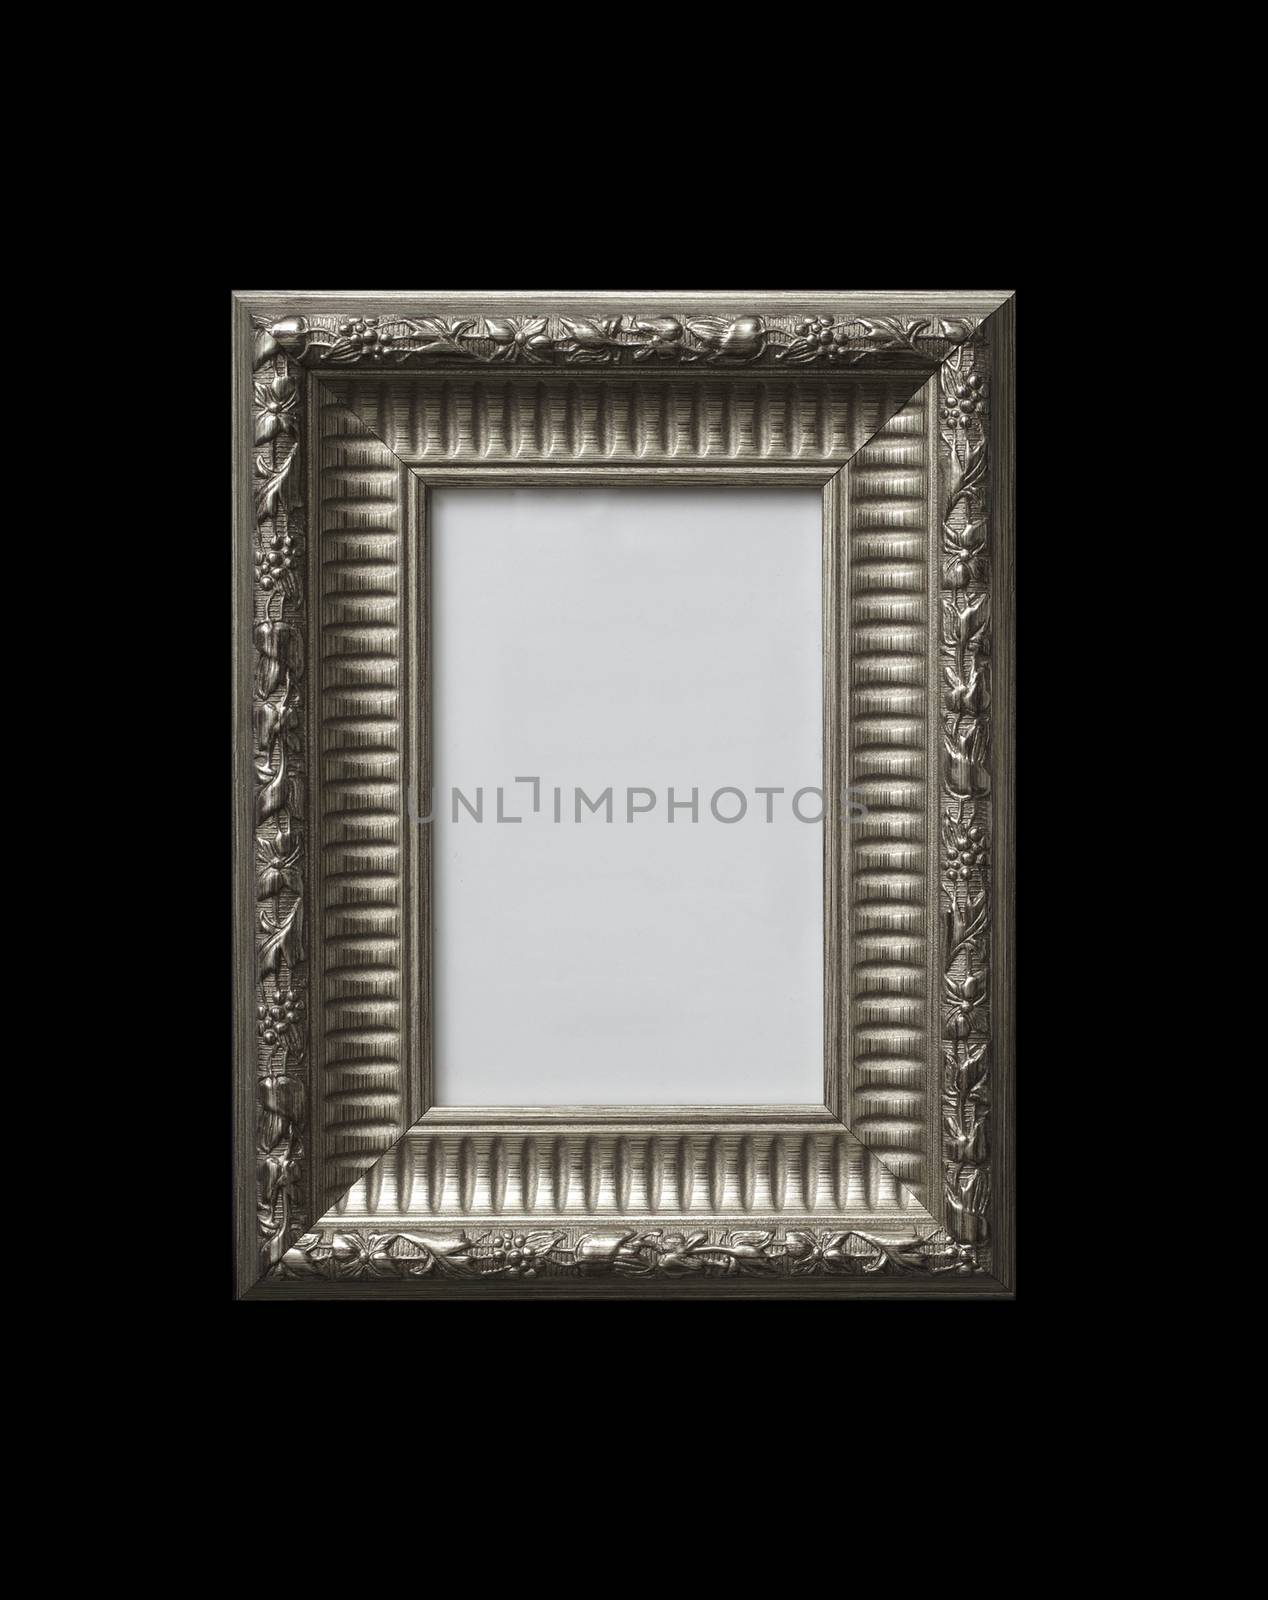 Vintage and blank photo frame on old wooden background